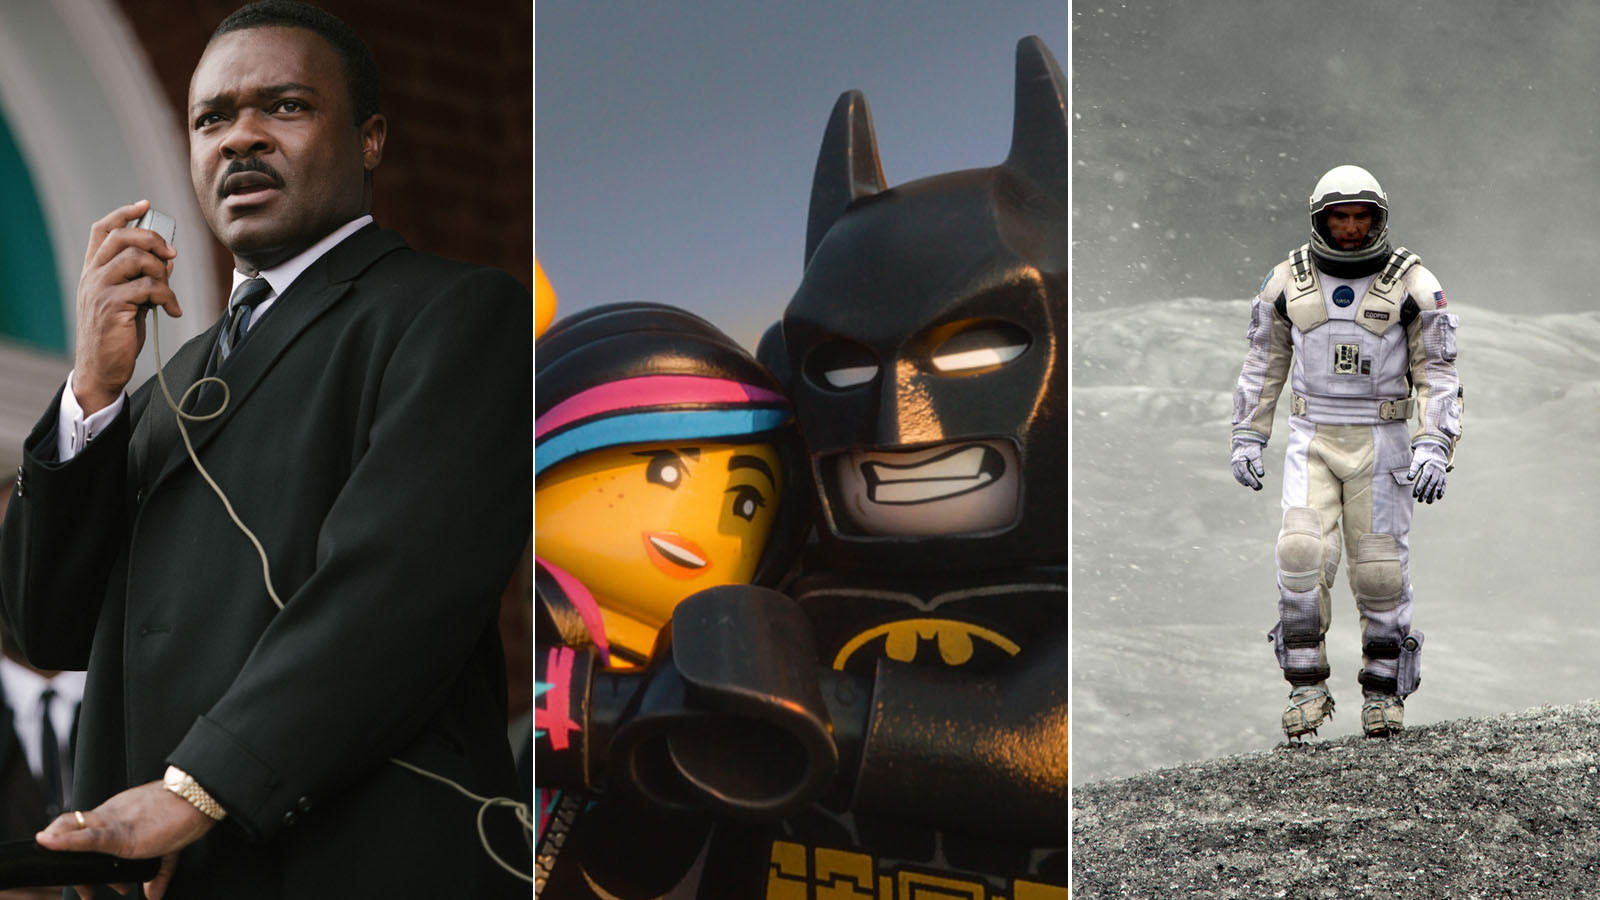 What are some movies nominated for the Academy Award in 2015?